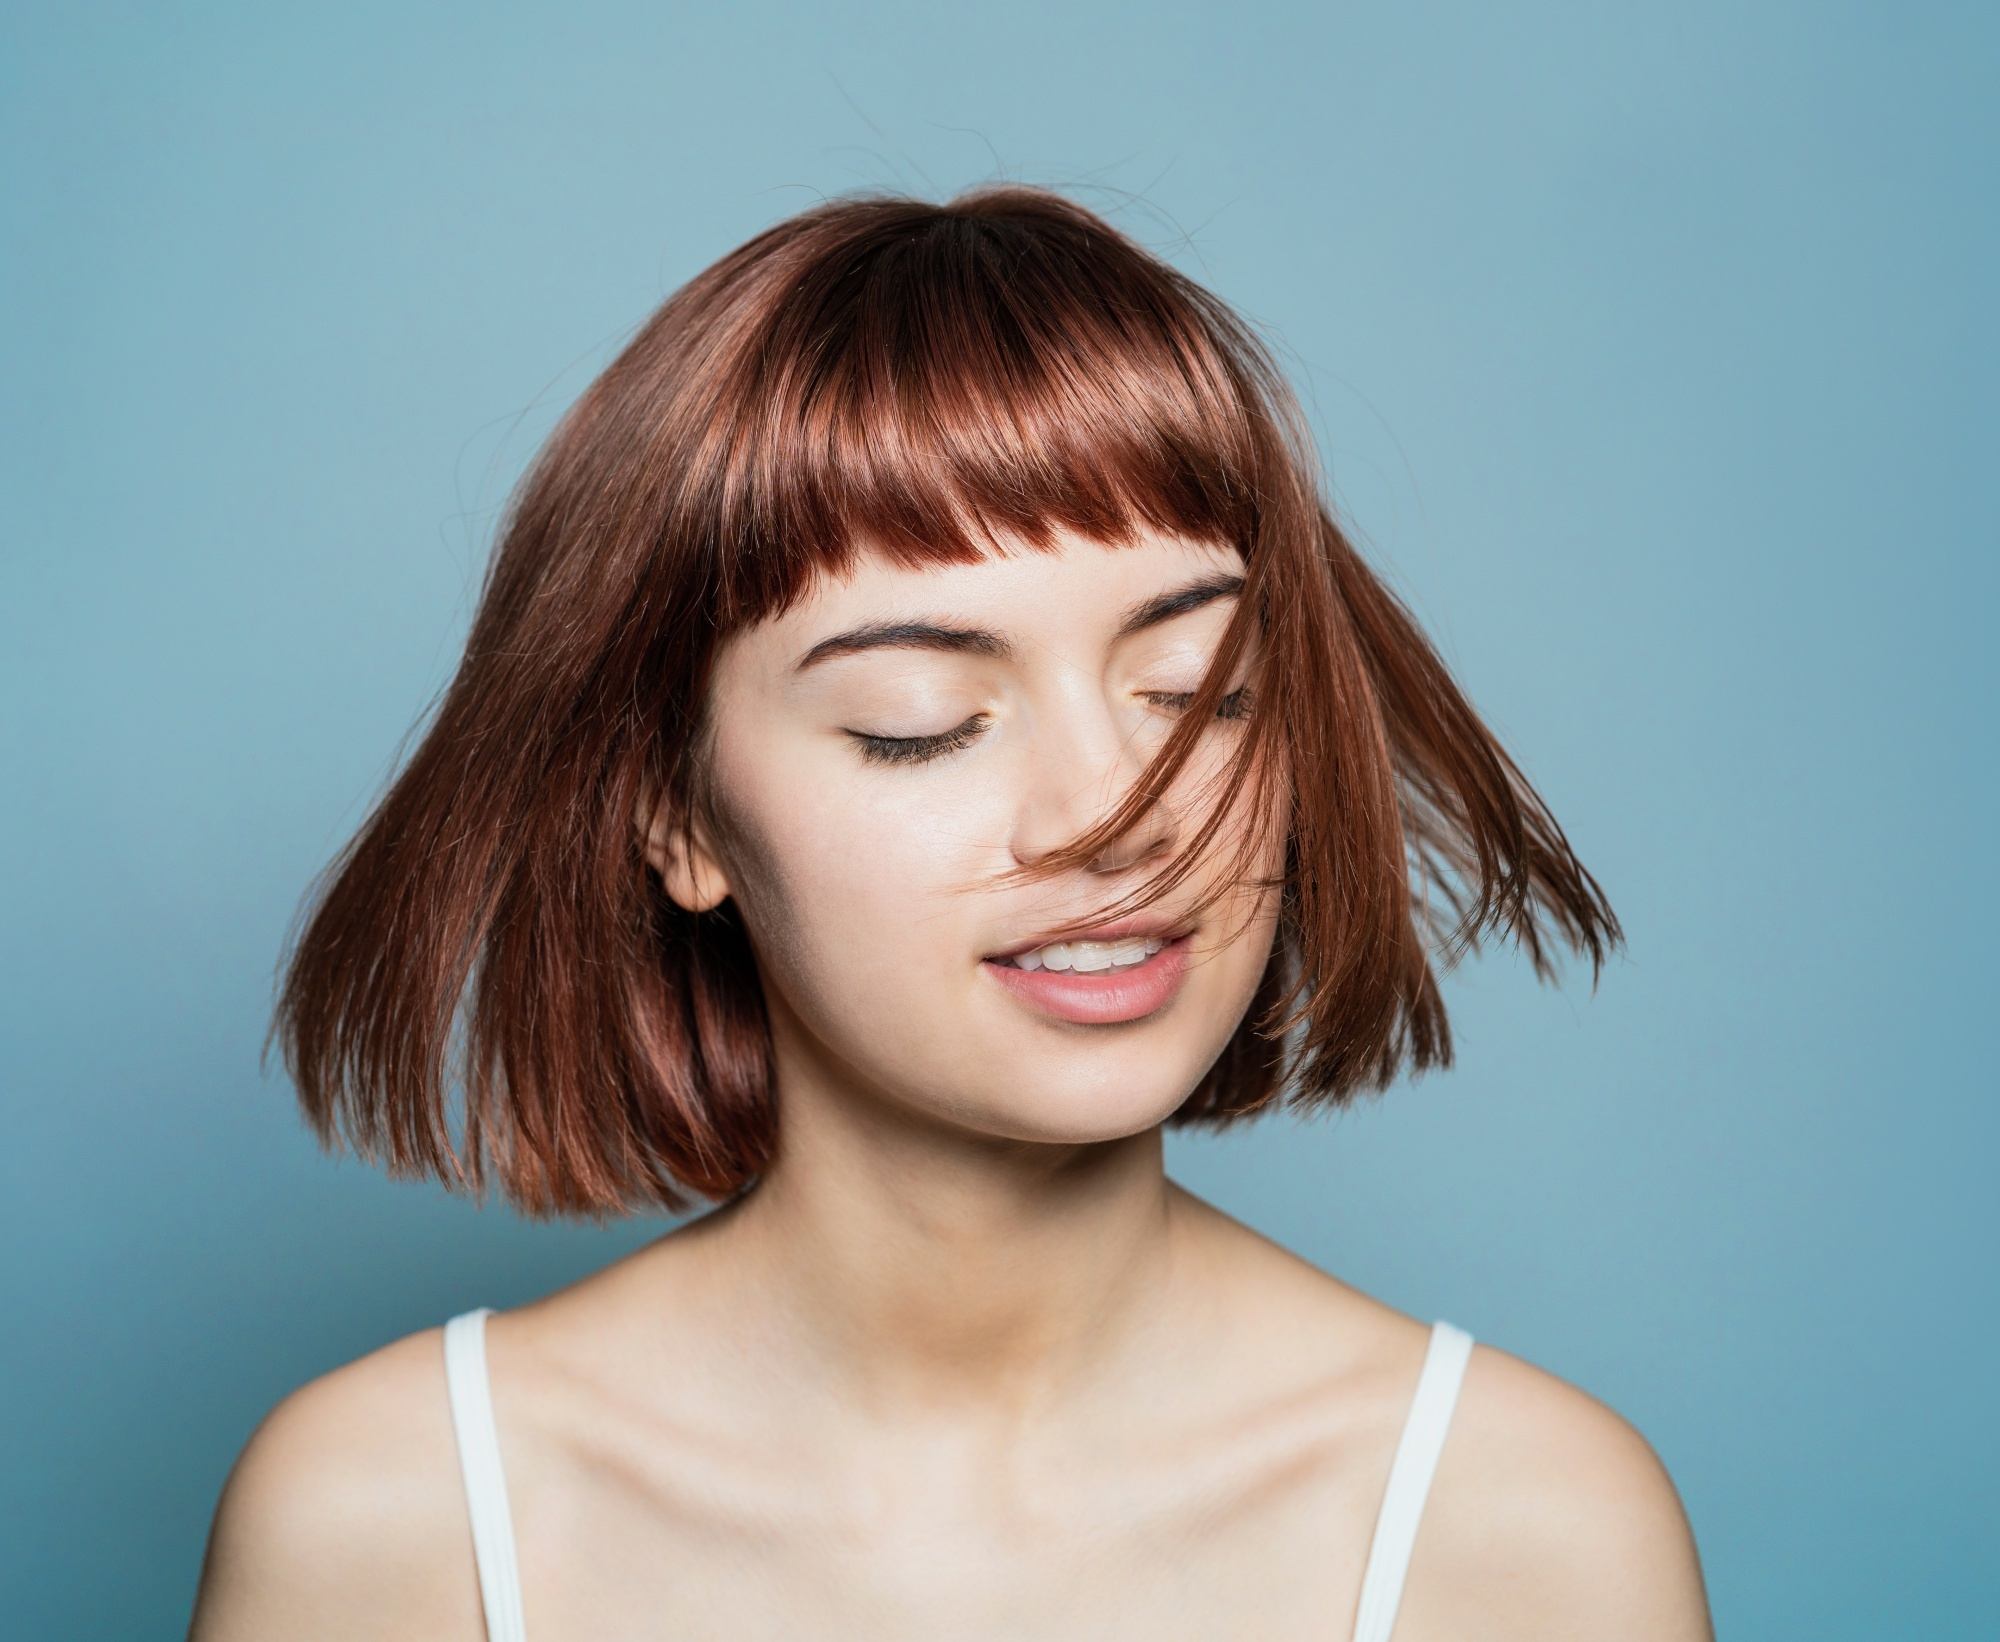 Bob haircuts for fine hair: Closeup shot of a woman with straight short brown hair with bangs with eyes closed